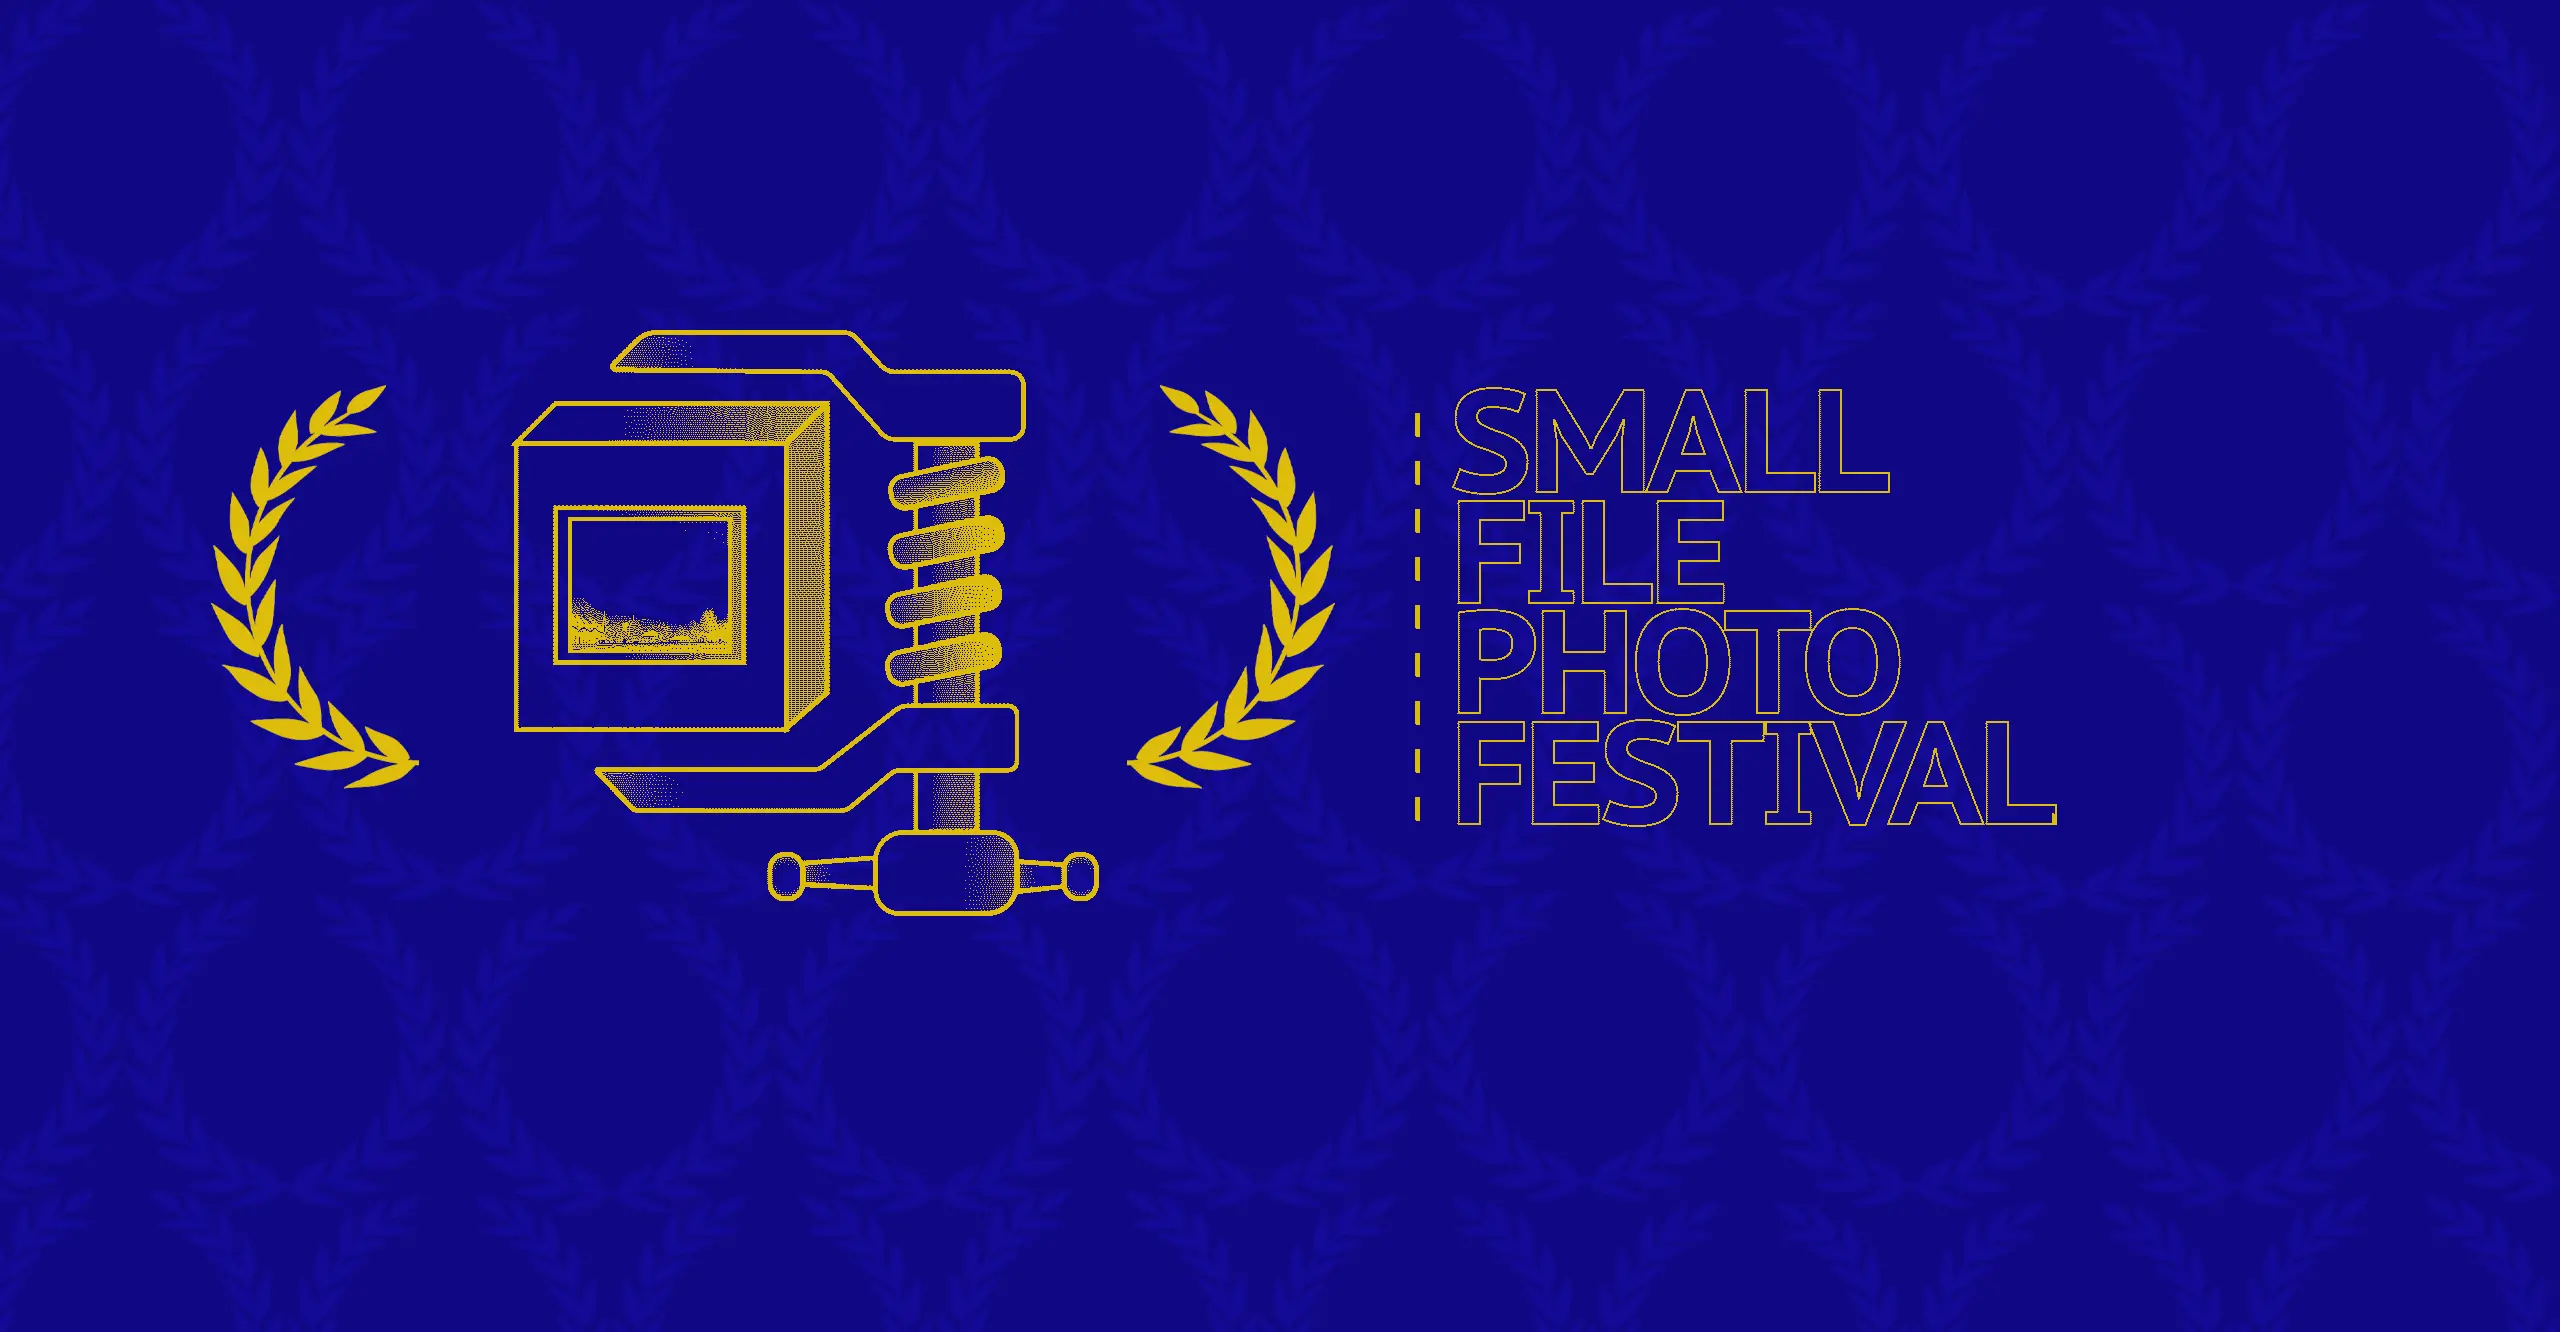 A clamp holding box that contains a photograph of landscape. "Small File Photo Festival" surrounded by award laurels